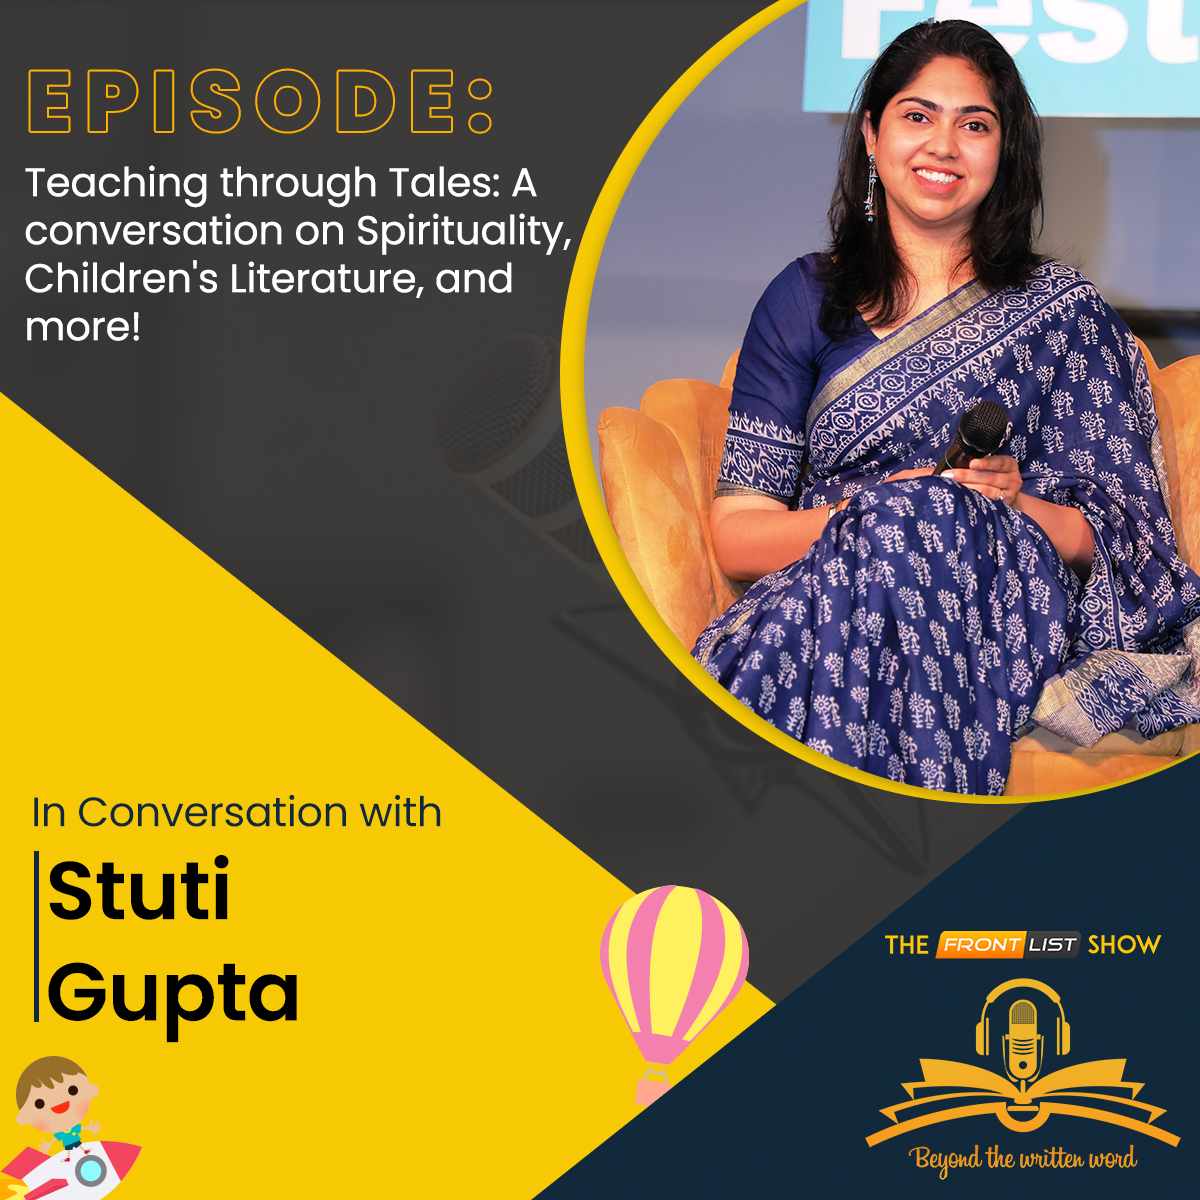 Episode 47 | Teaching through Tales: A Conversation on Spirituality, Children's Literature, and more!